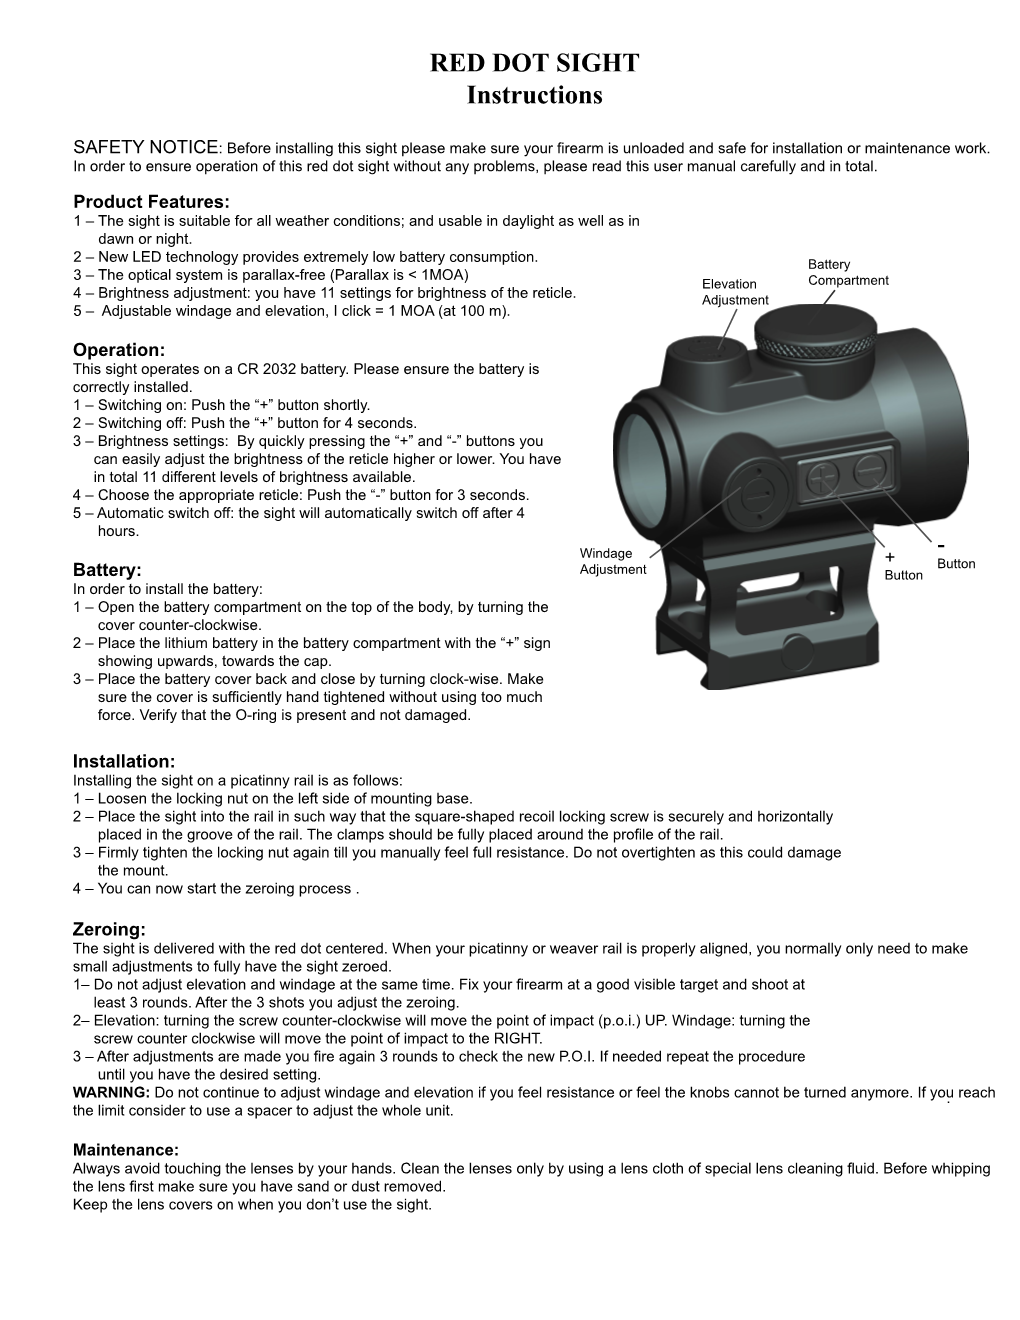 RED DOT SIGHT Instructions